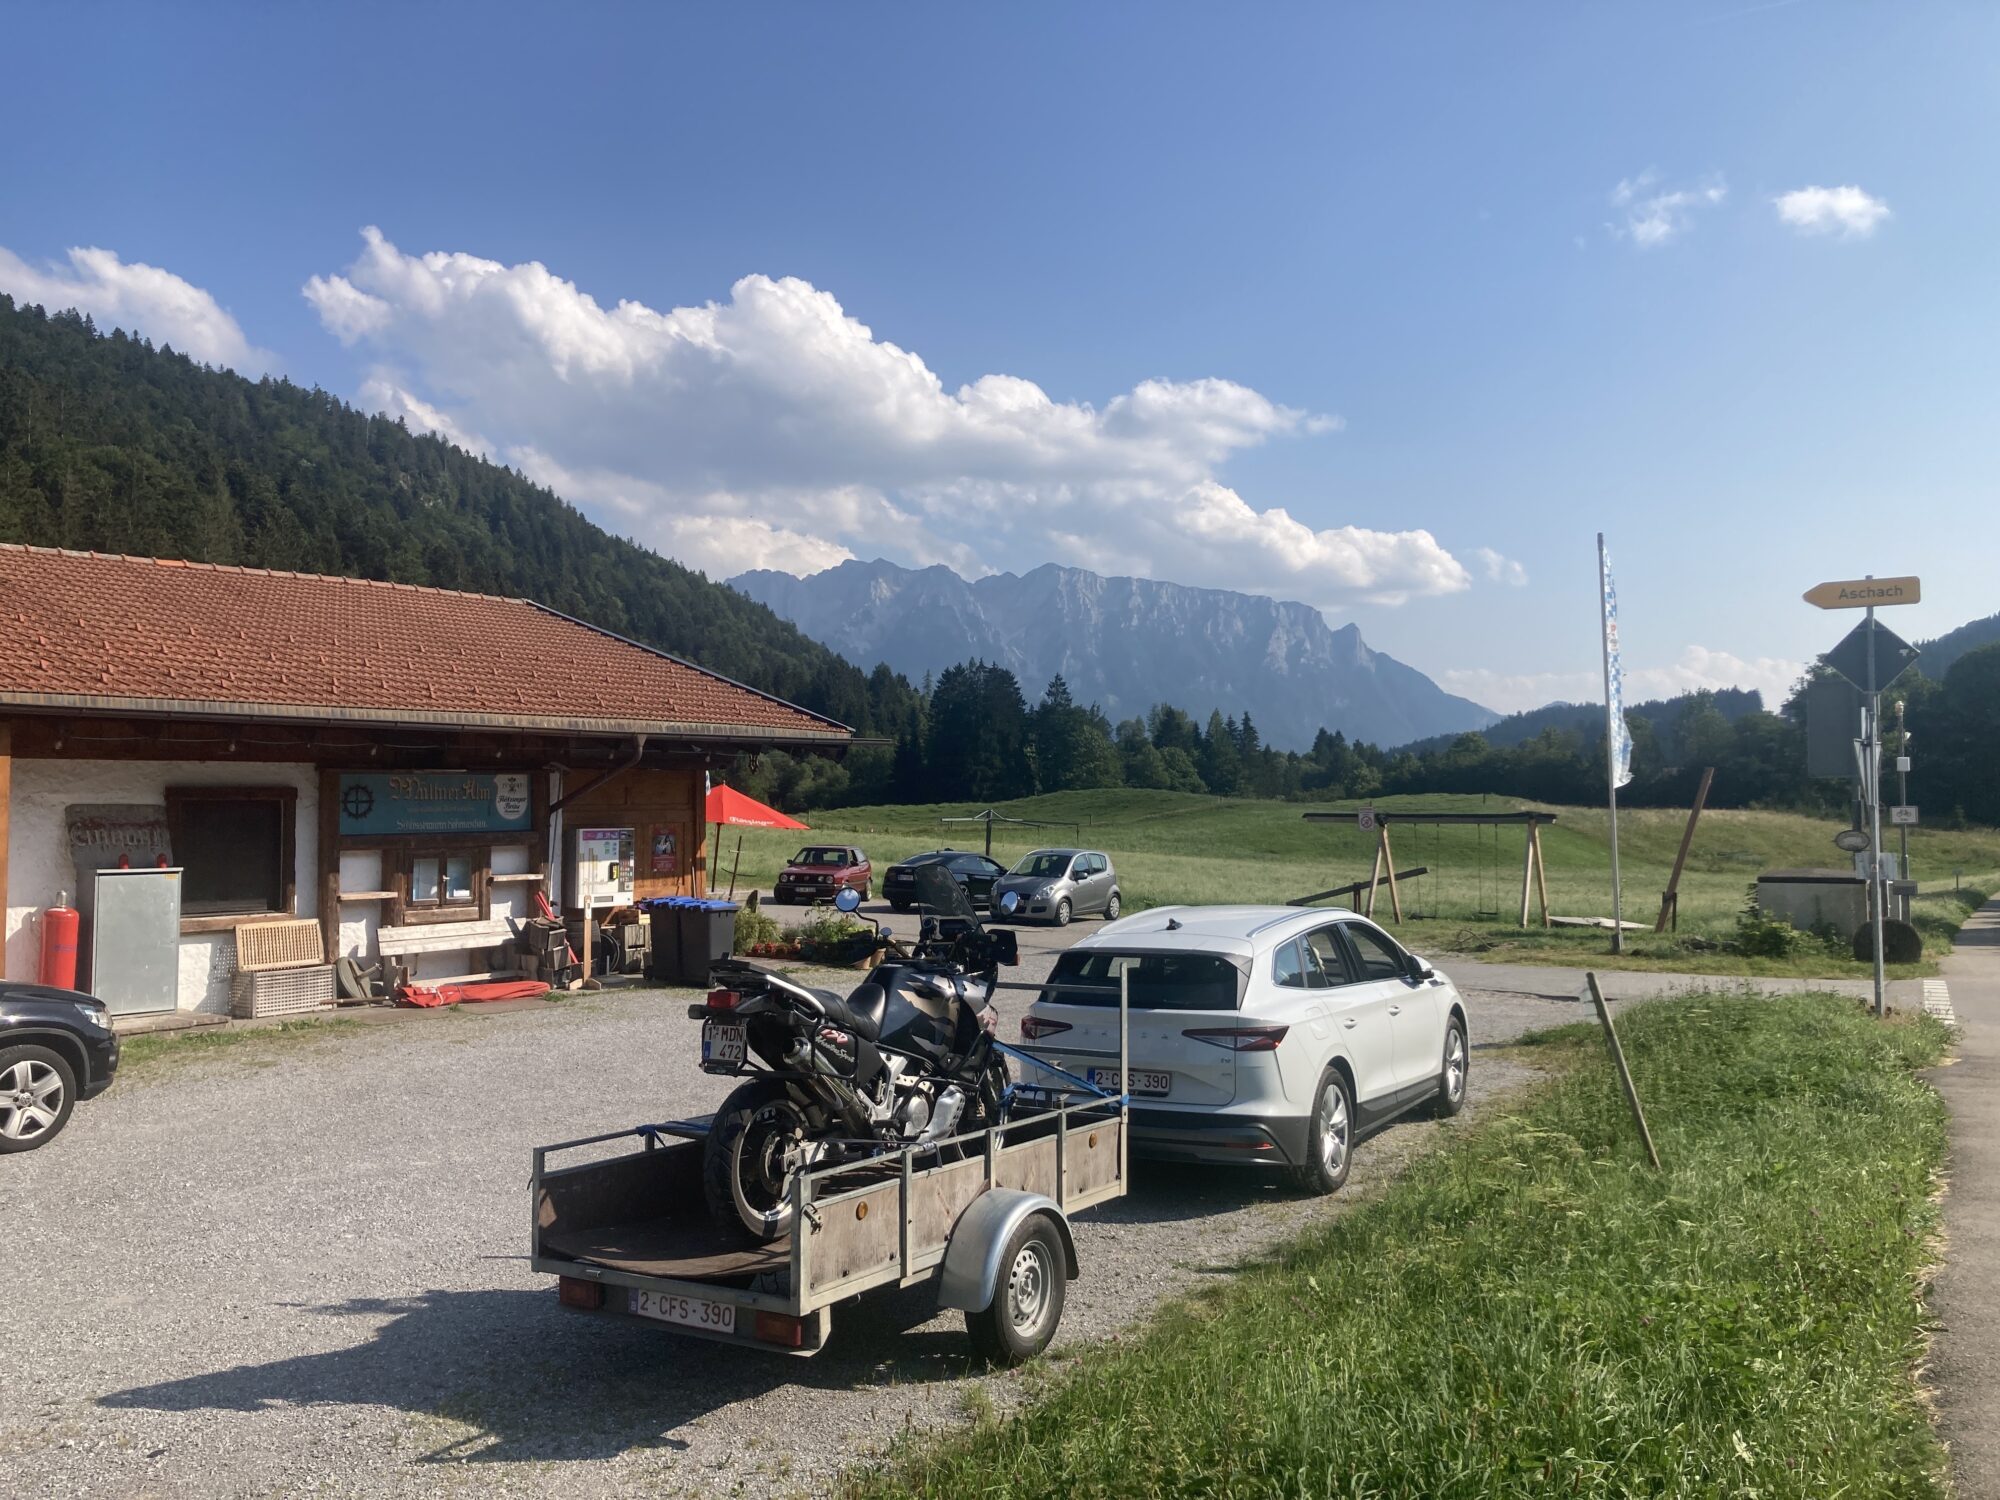 Driving to Austria in an electric car? No problem!